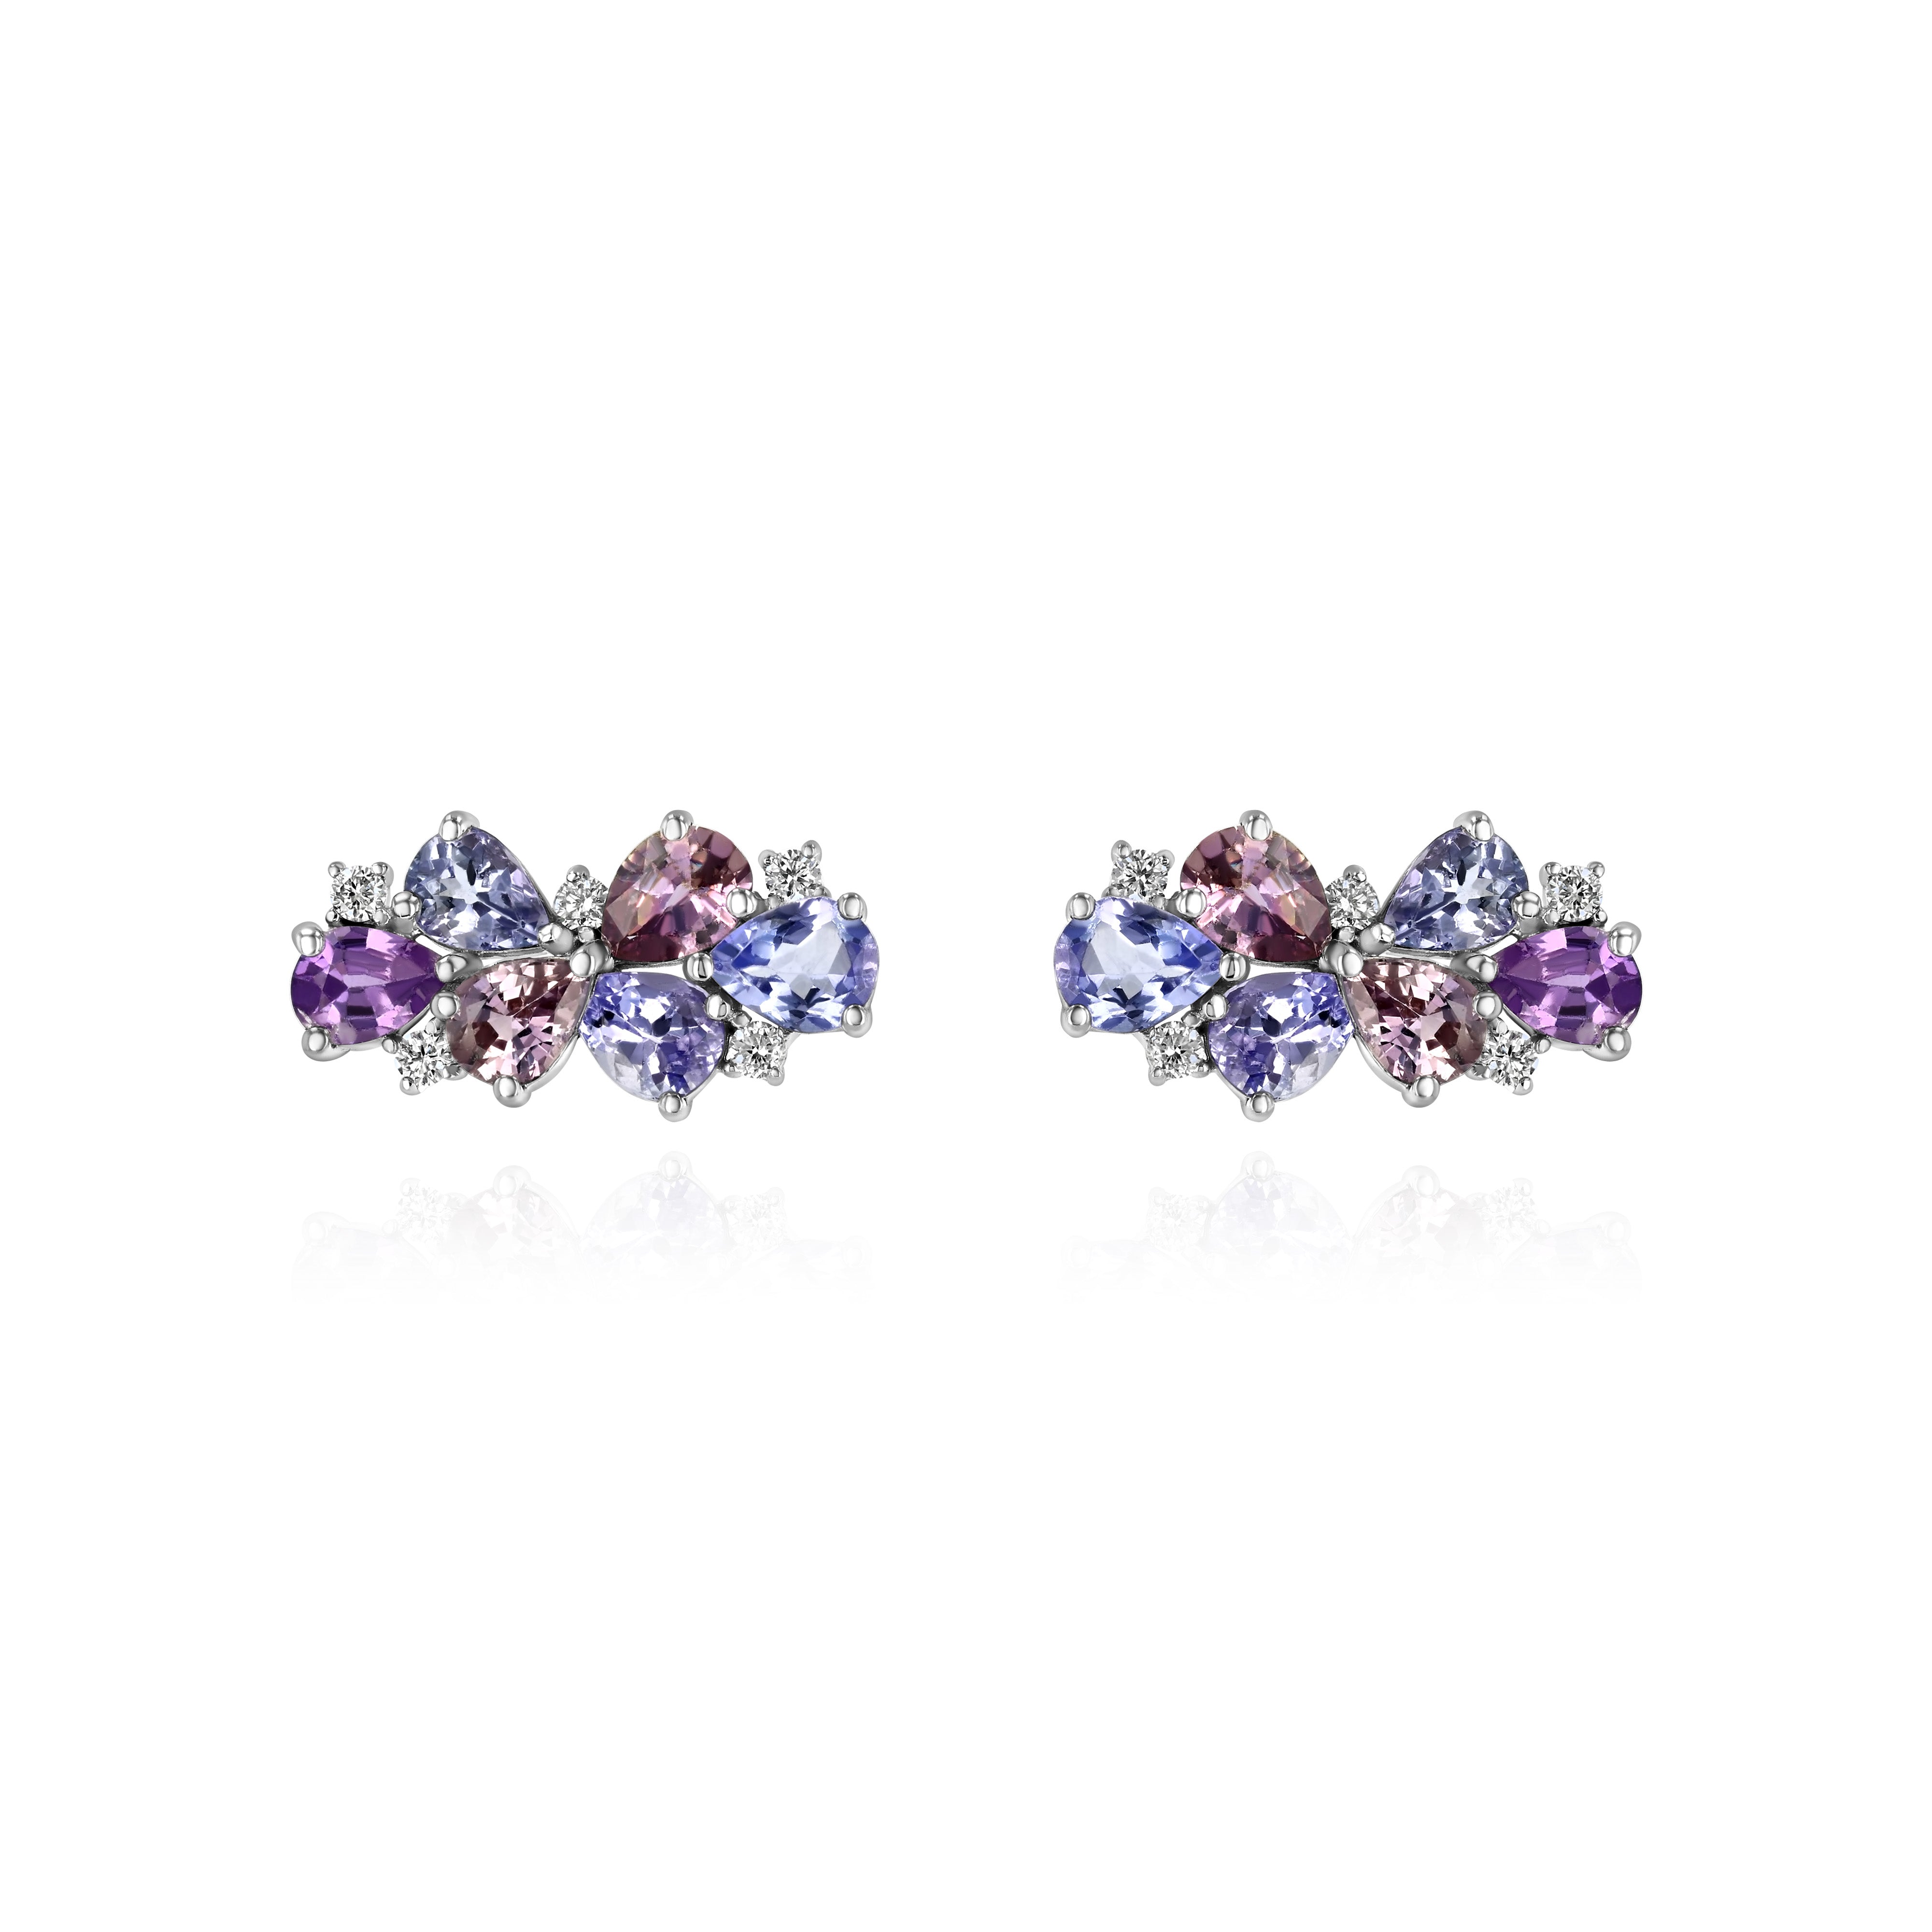 White Gold Earrings with Purple and Blue Sapphires, and Diamonds, Small